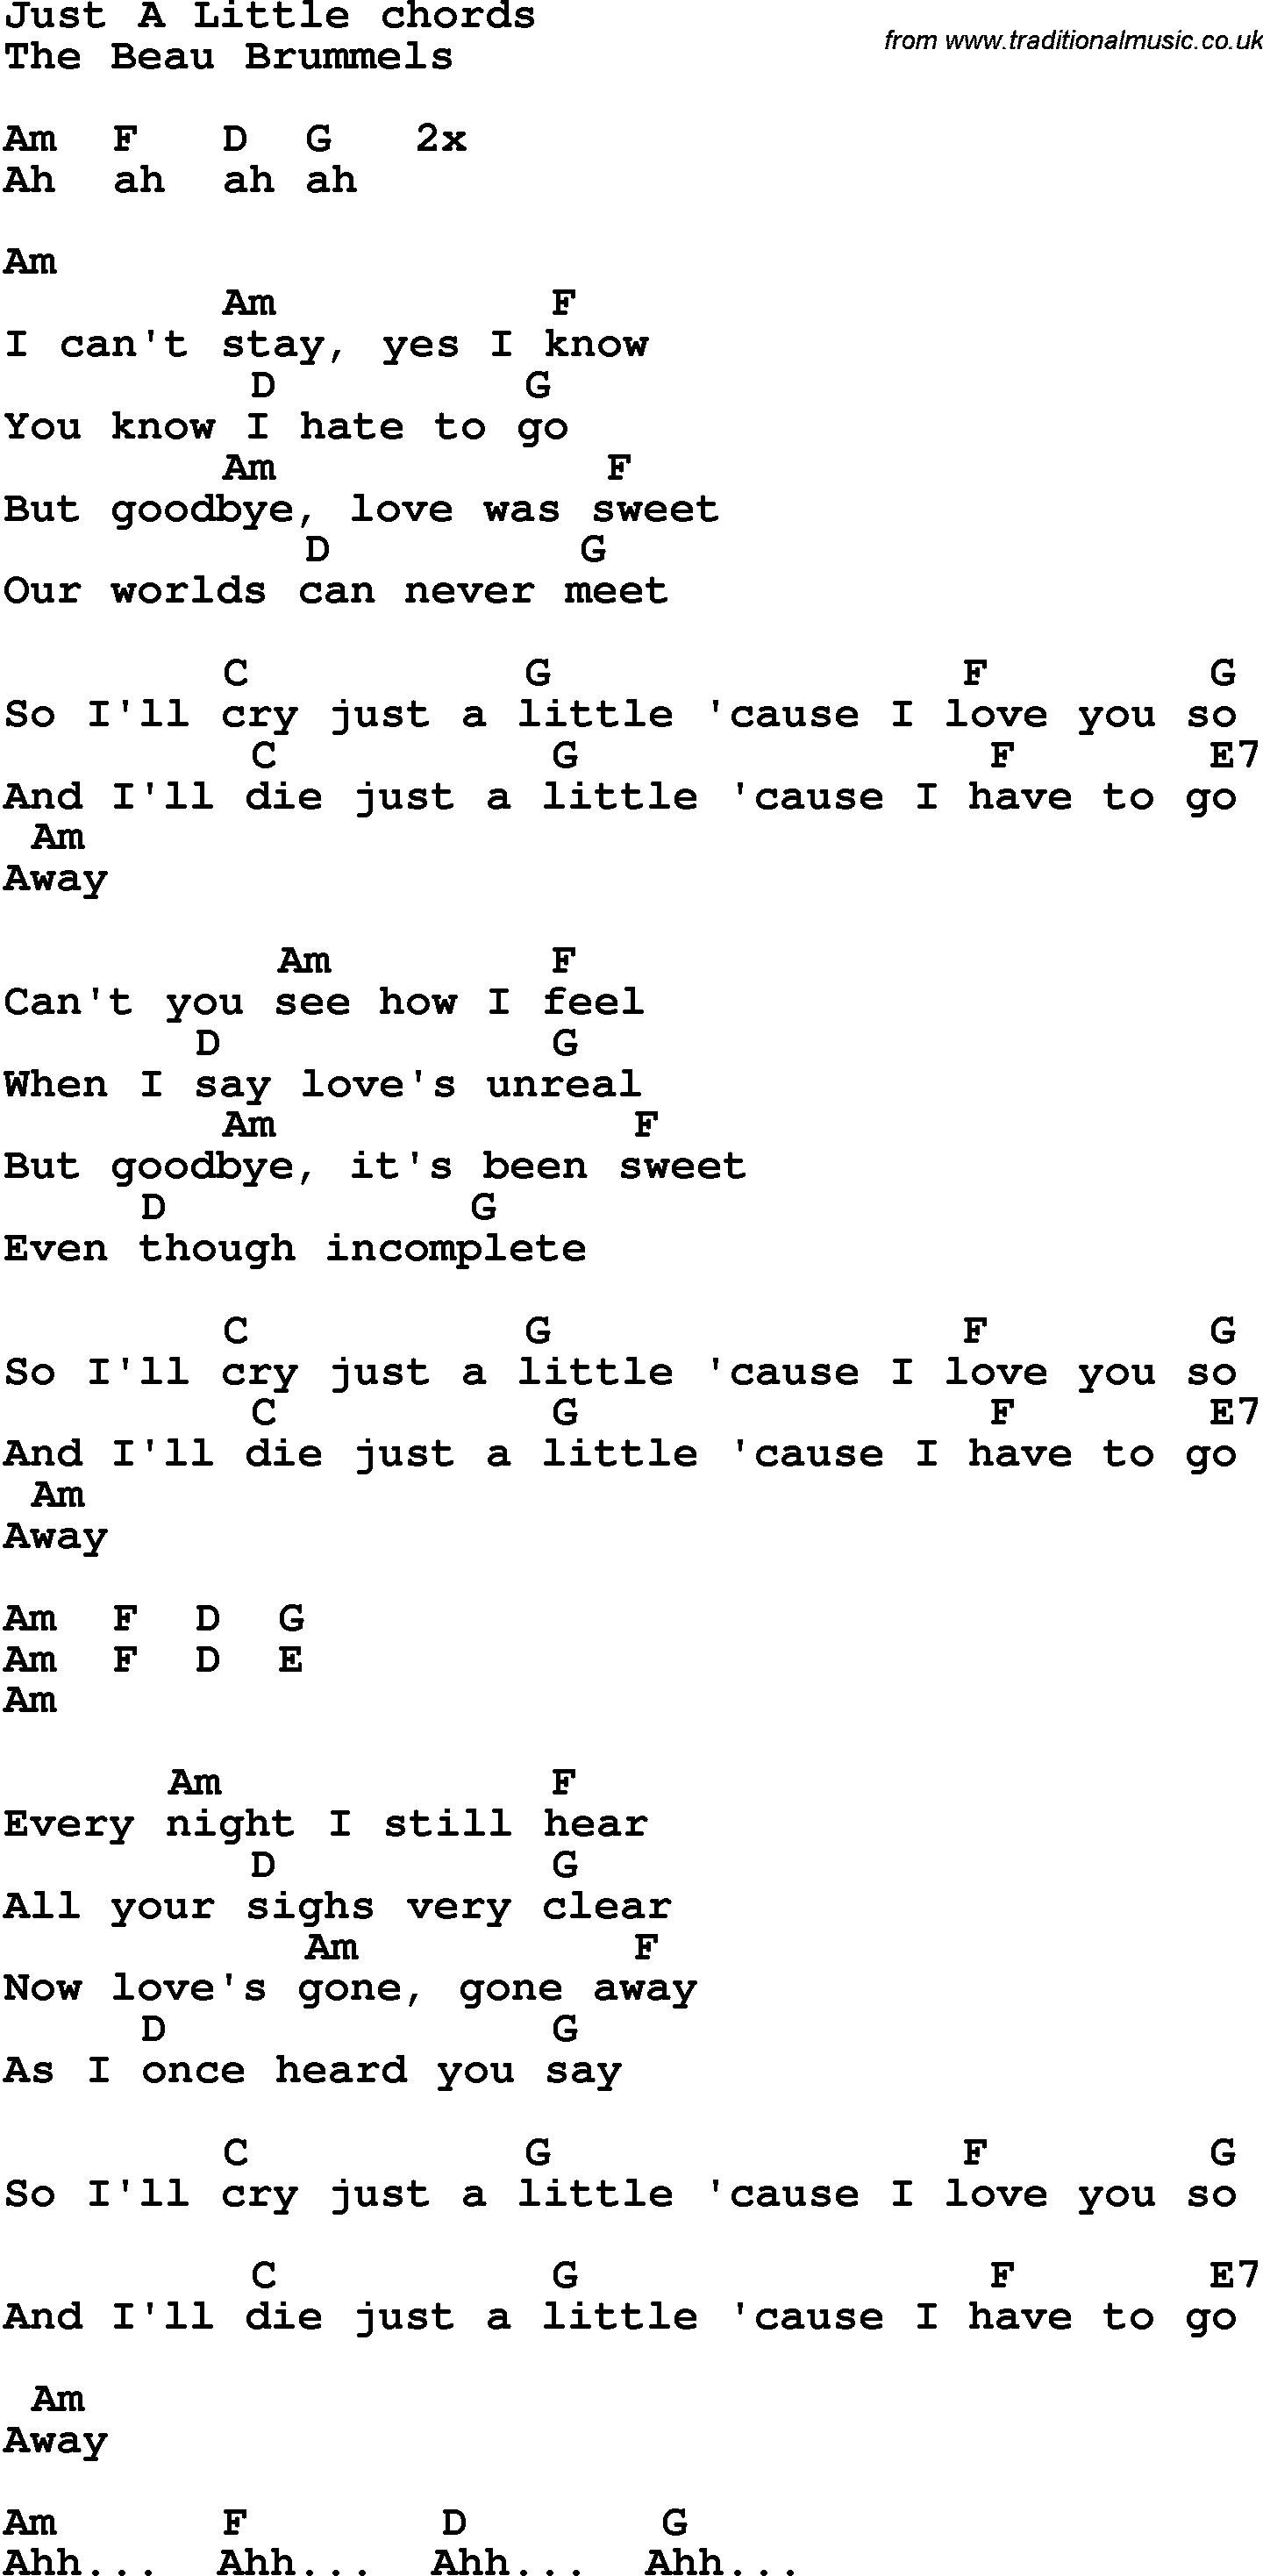 Song Lyrics with guitar chords for Just A Little